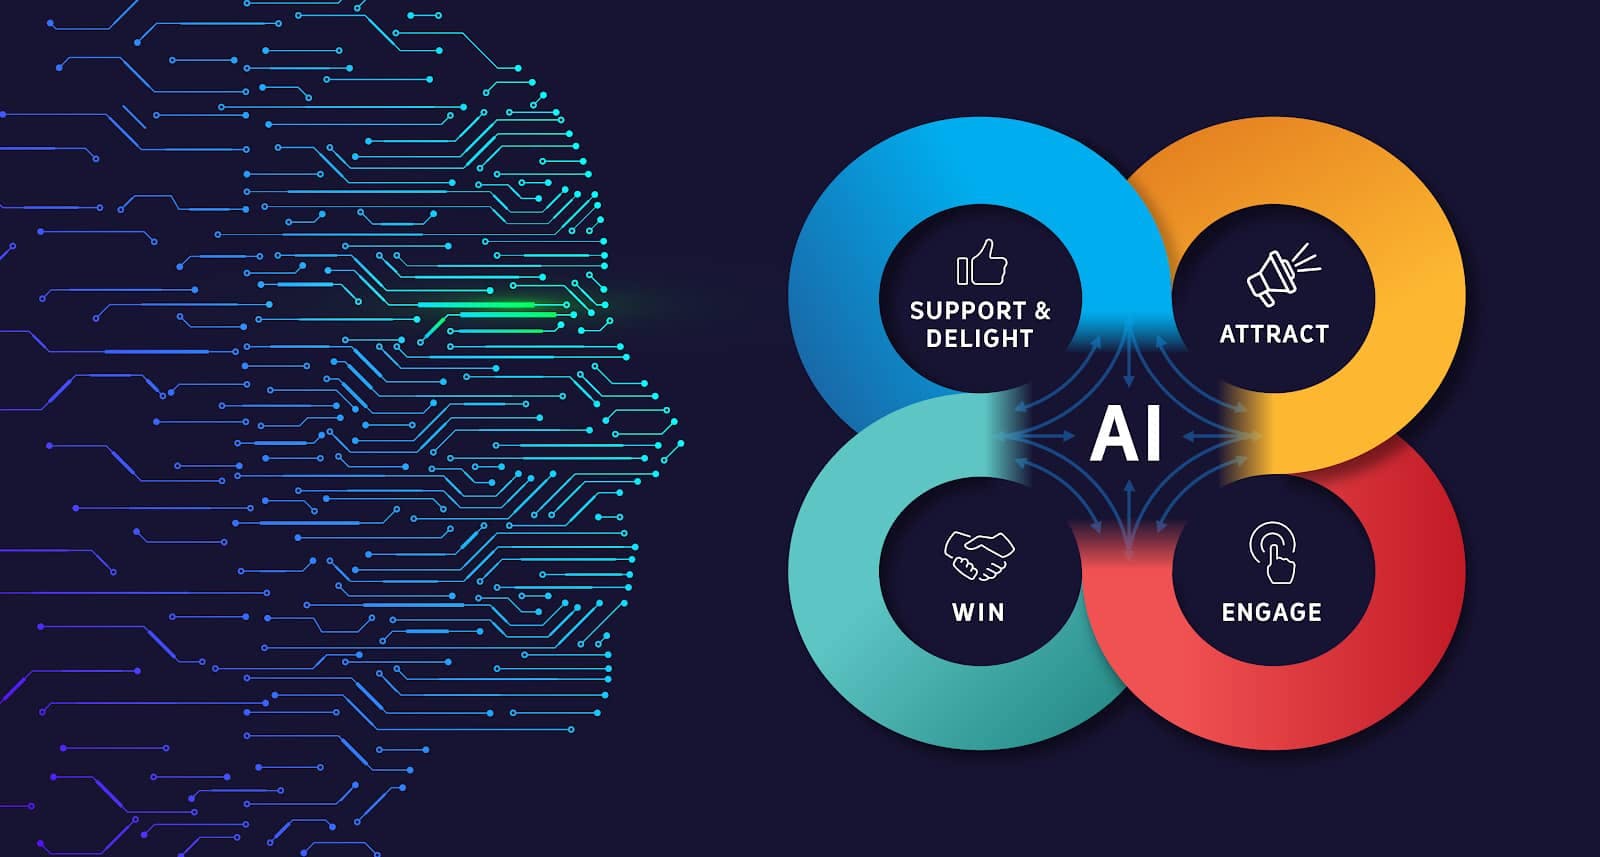 How to Increase sales revenue with the help of AI